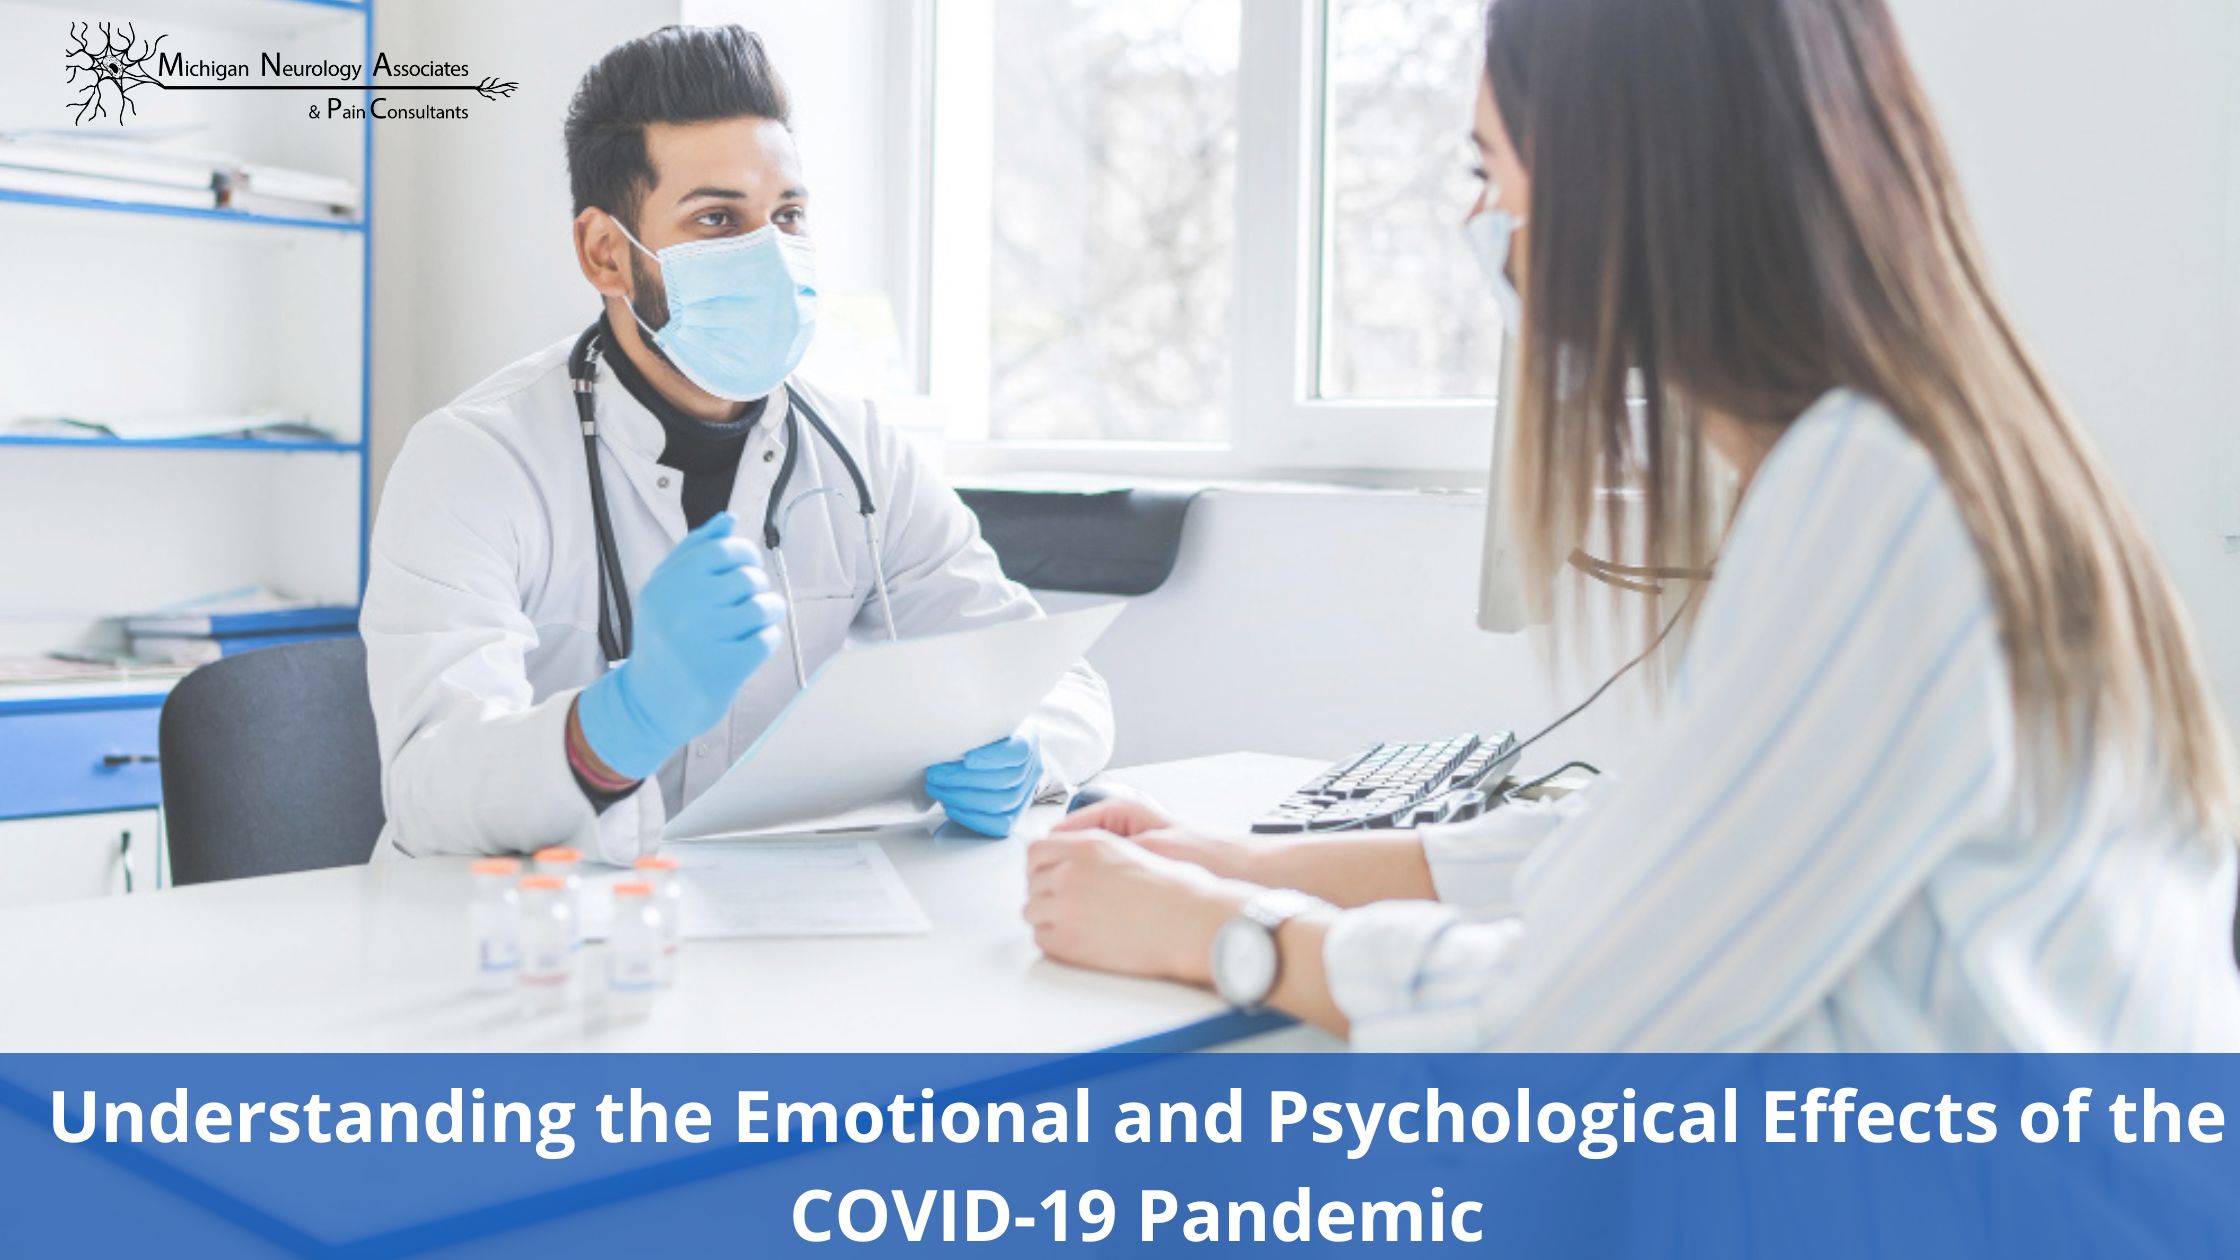 Understanding the Emotional and Psychological Effects of the COVID-19 Pandemic